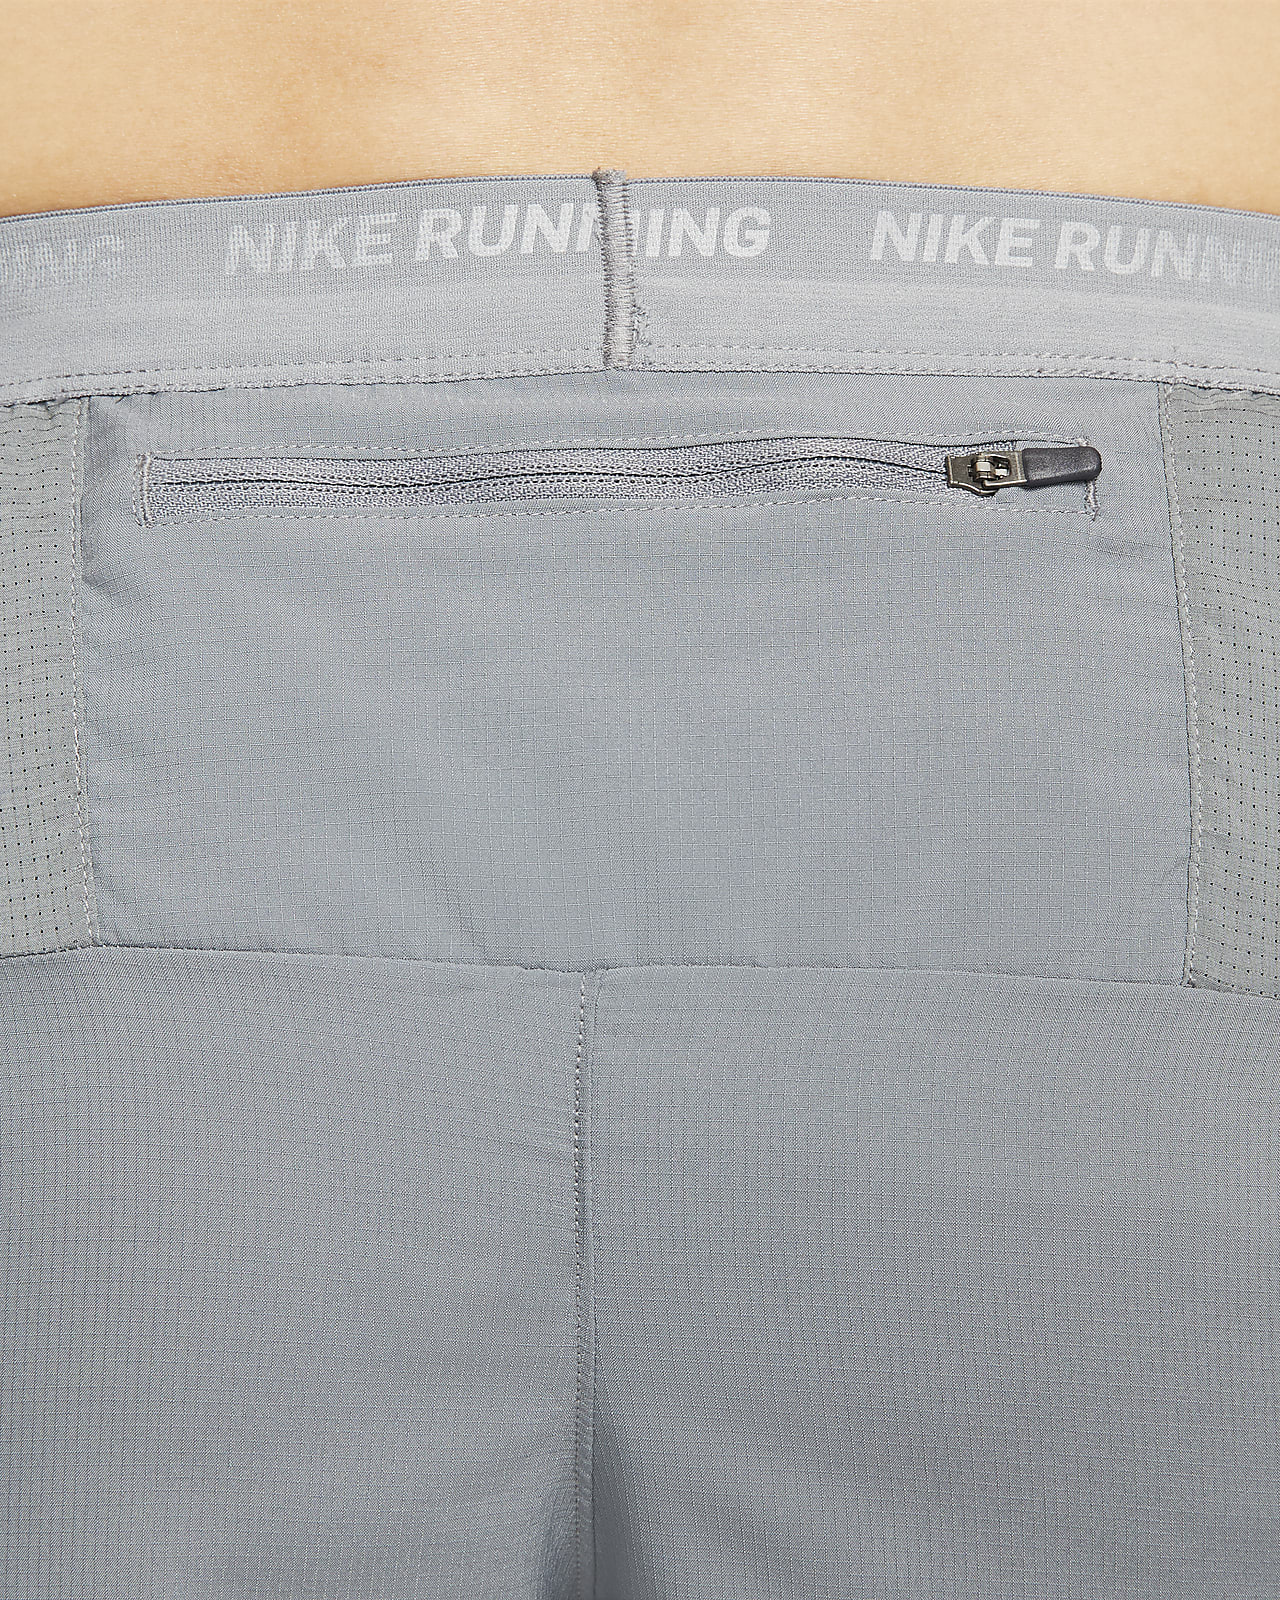 Nike Dri-FIT Stride Men's 18cm (approx.) Brief-Lined Running